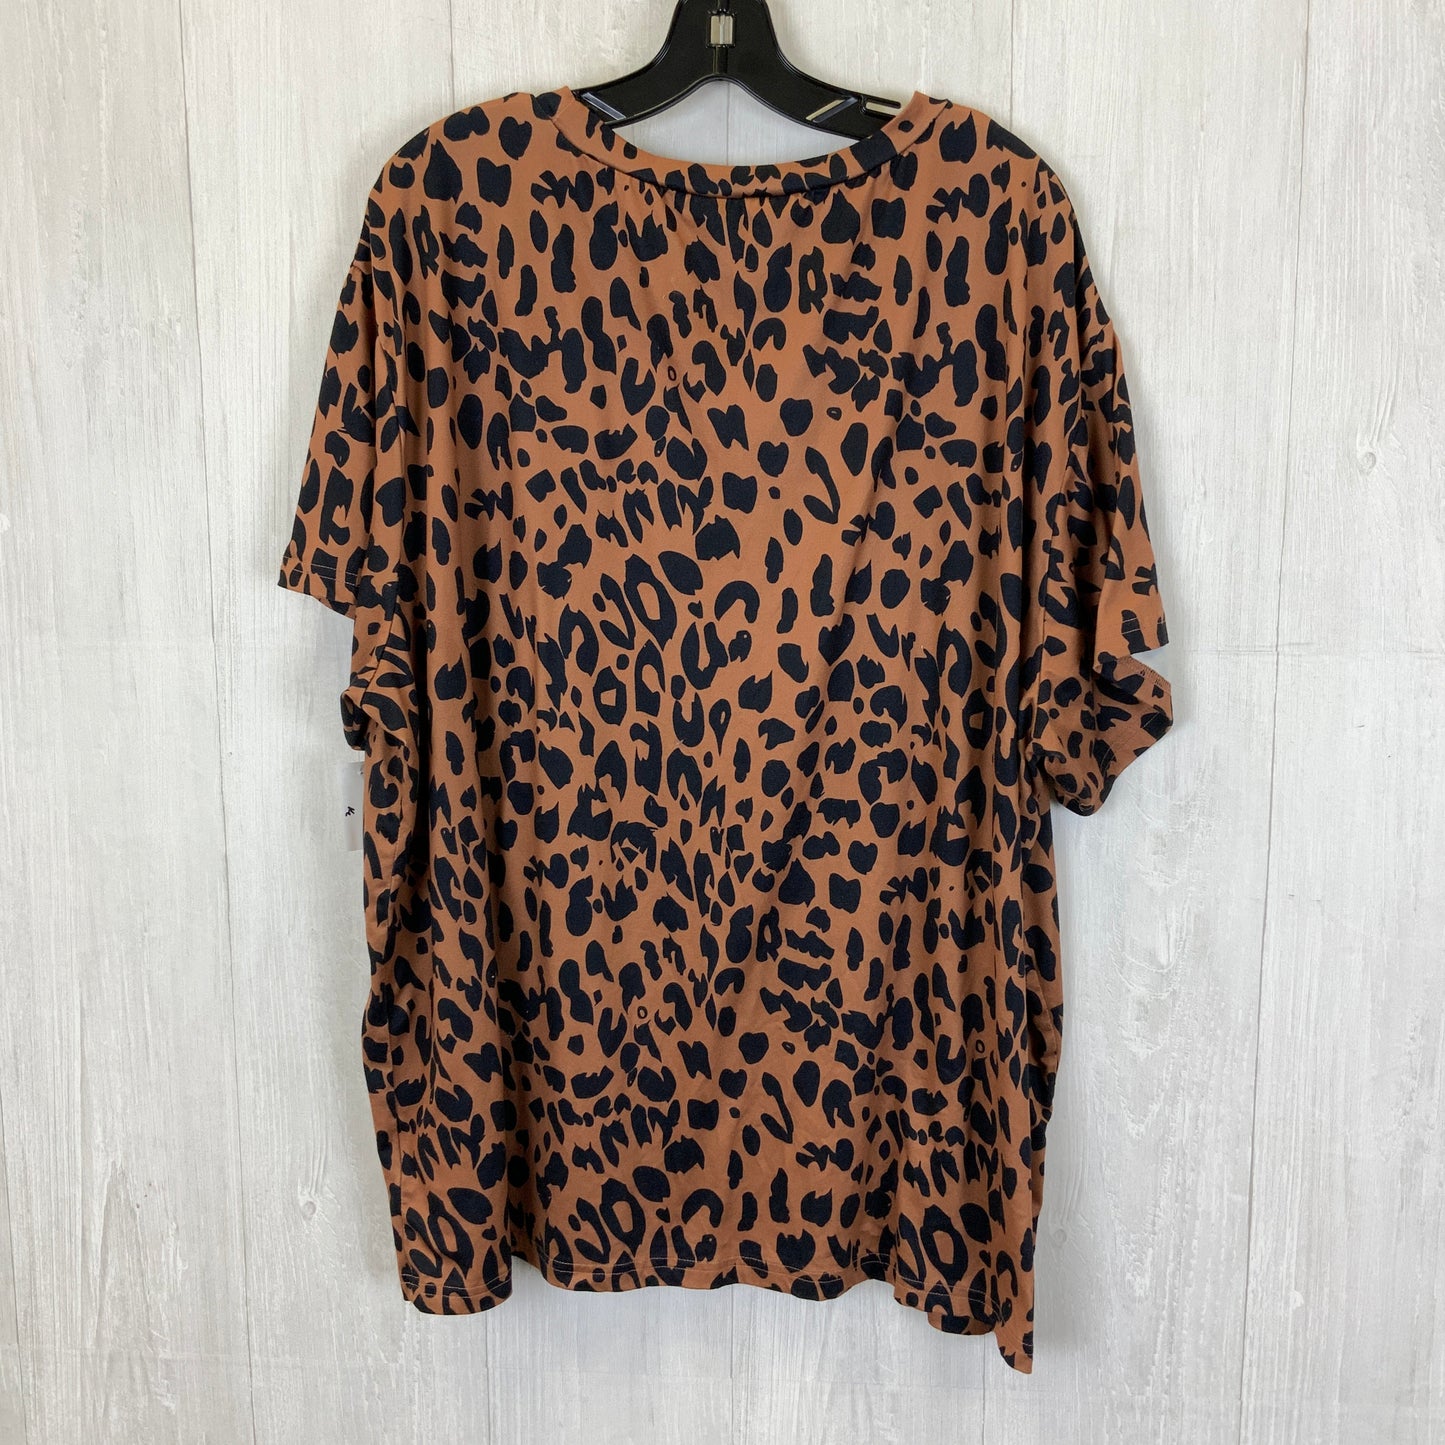 Black & Brown Top Short Sleeve Basic Clothes Mentor, Size 4x